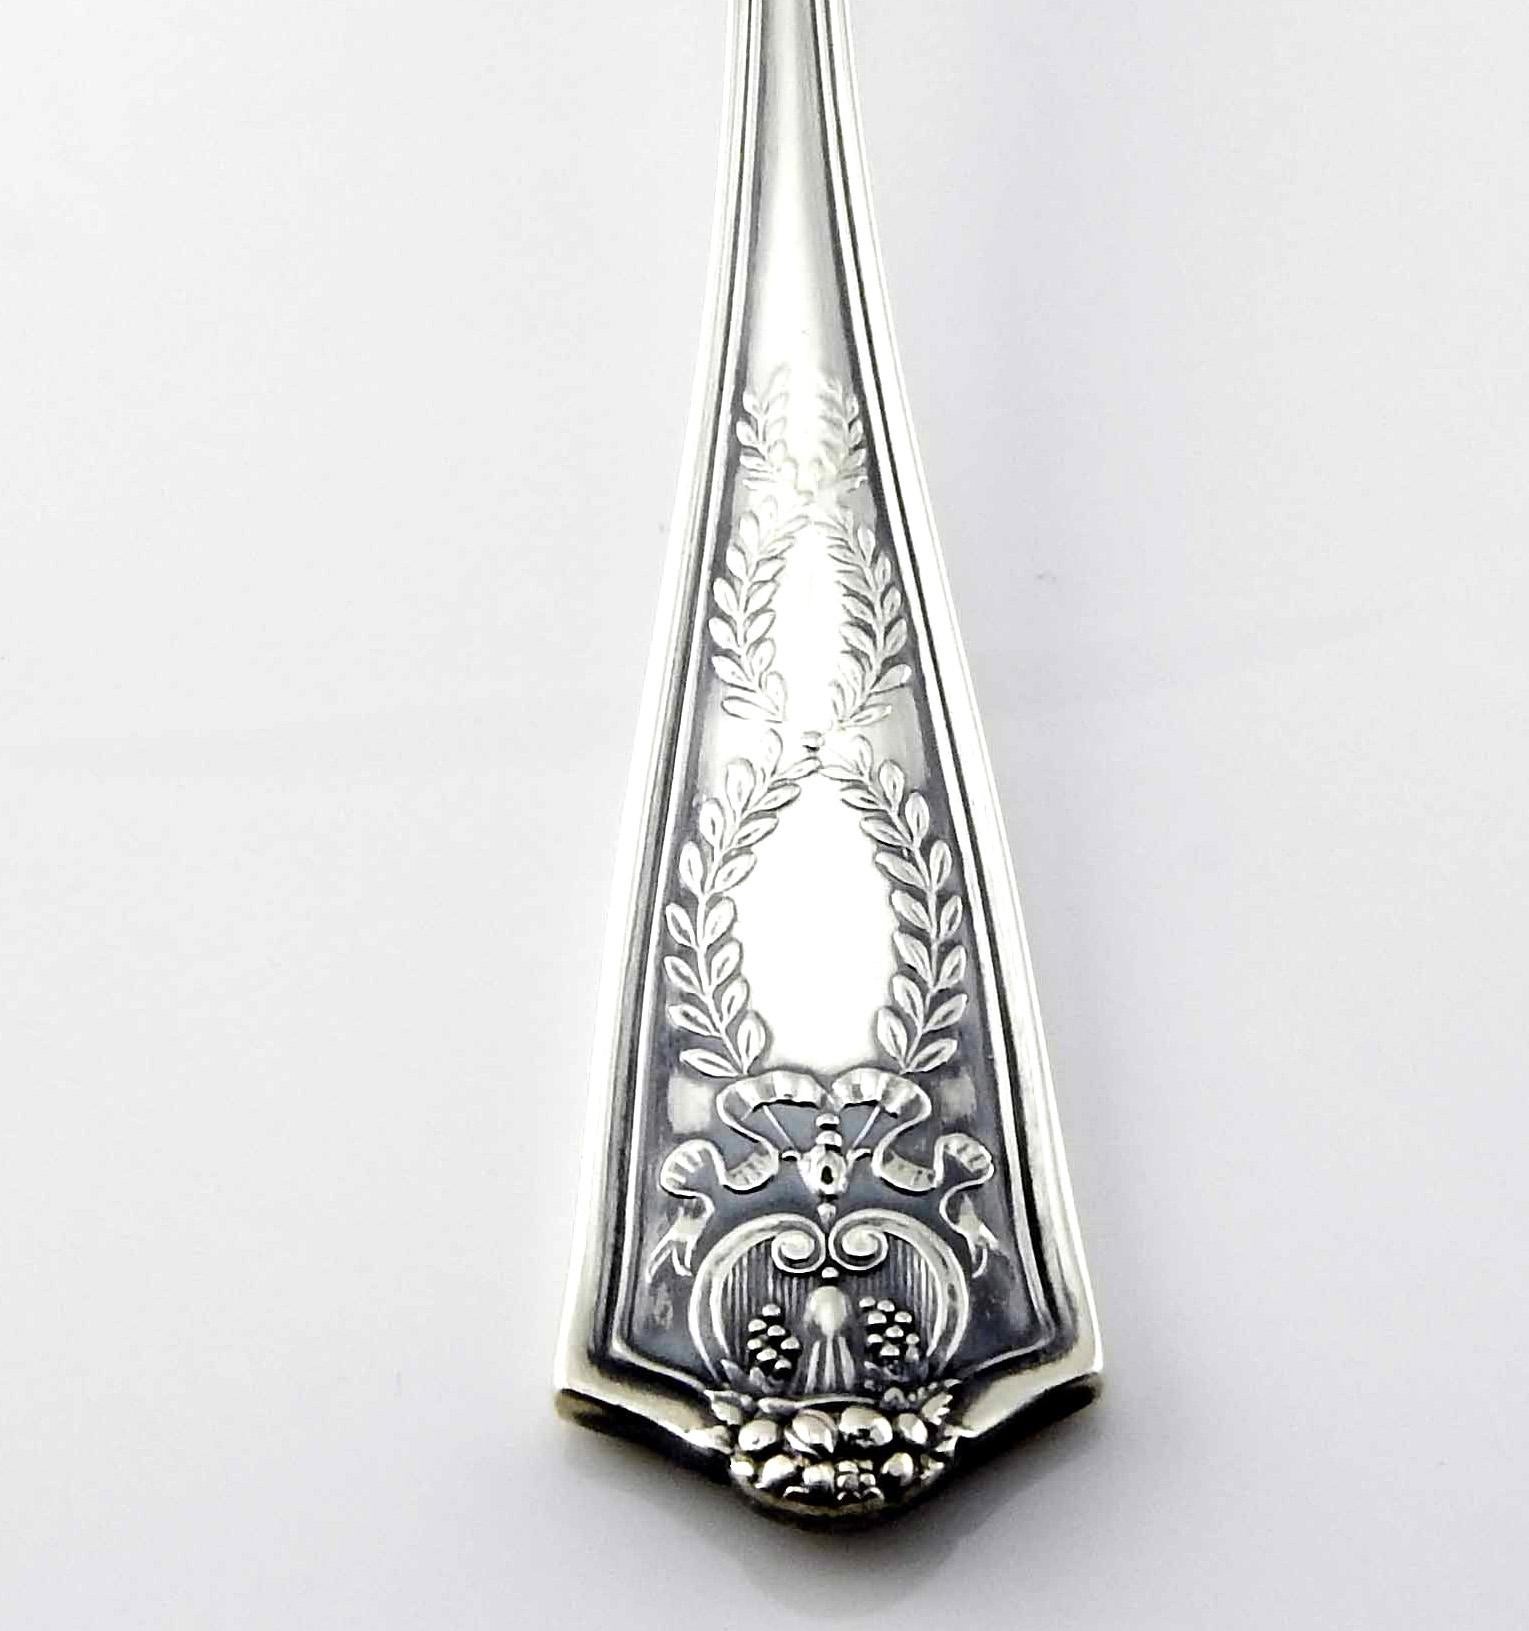 Antique Tiffany & Co Sterling Silver Winthrop Grapefruit Spoon with Monogram 1